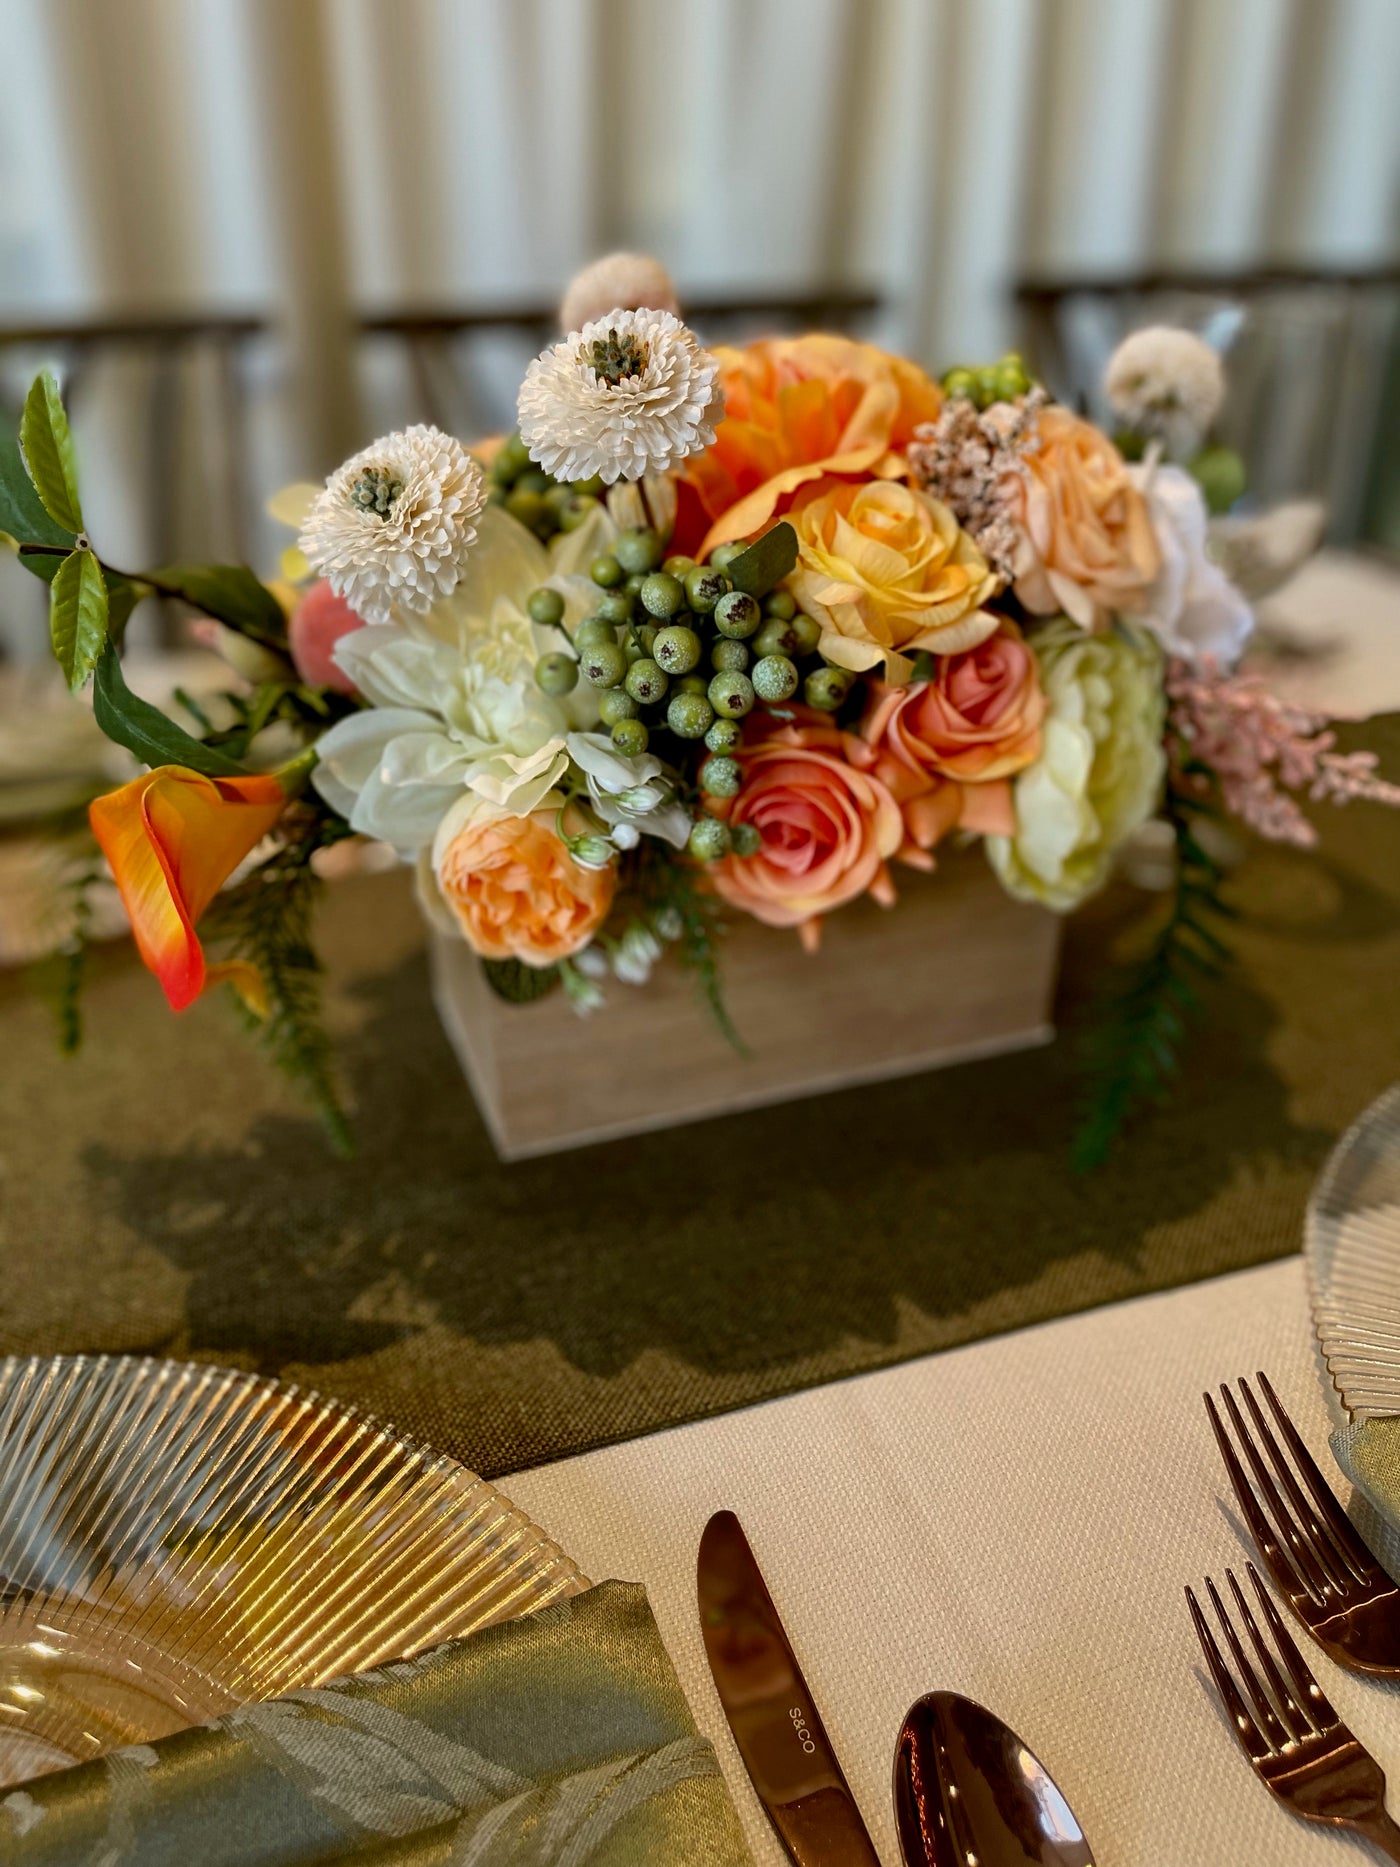 Rent a Rose- Centrepiece- orange, white and pale green flowers-  Rent for five days for $54.00.